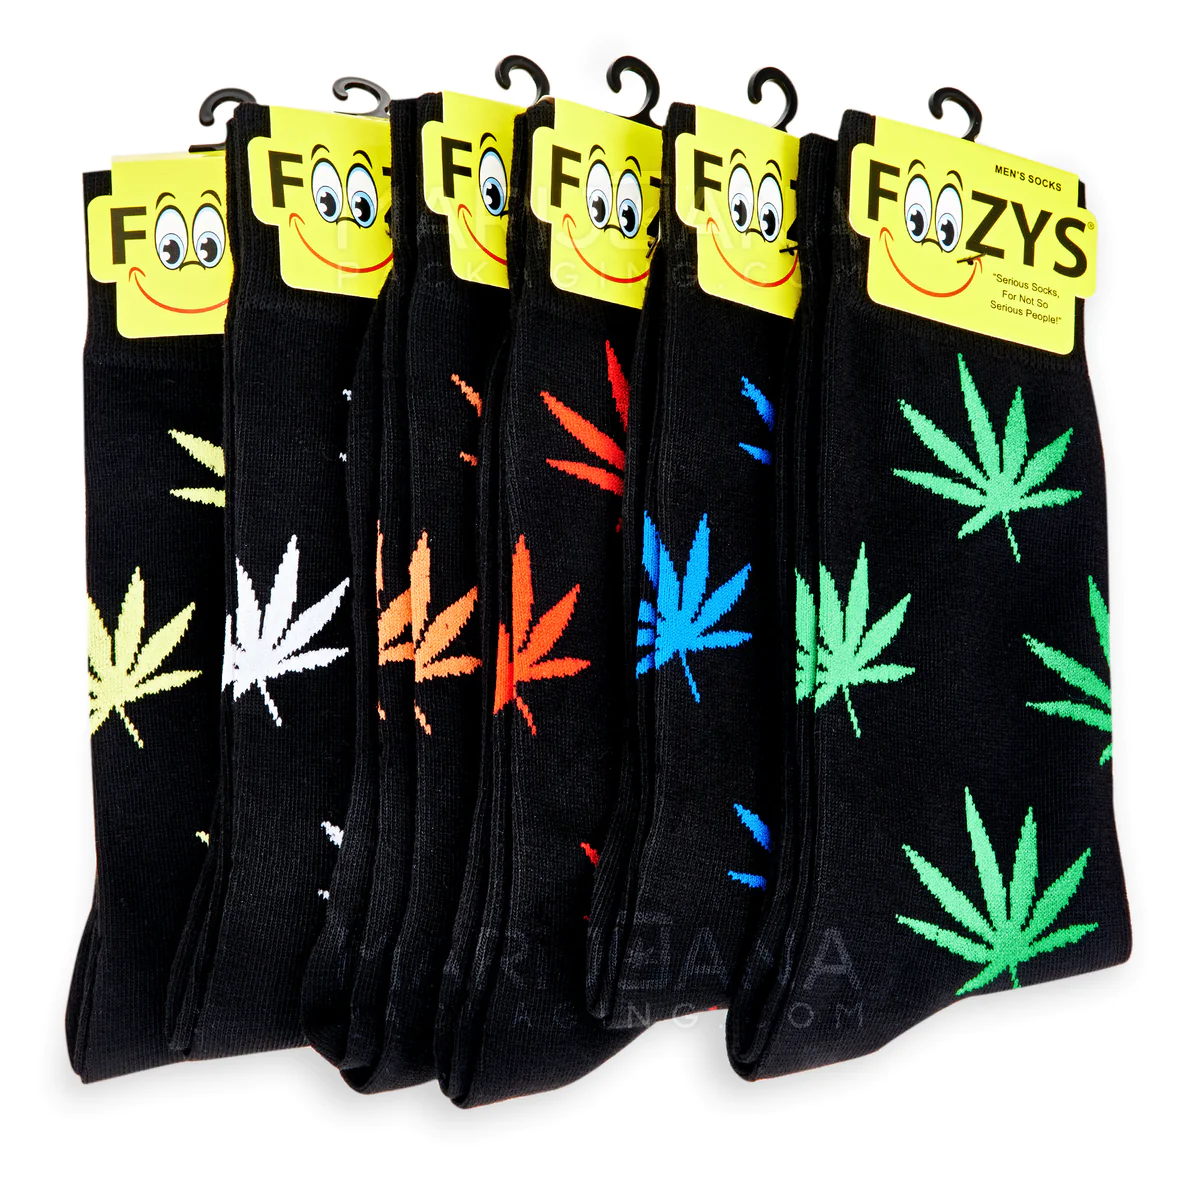 Mens Foozys Socks Design - Marijuana Canabis Leaf in Black w/ Accents in Men's Foozys Sock Design in Yellow, Red, Green, Blue, White, Peach